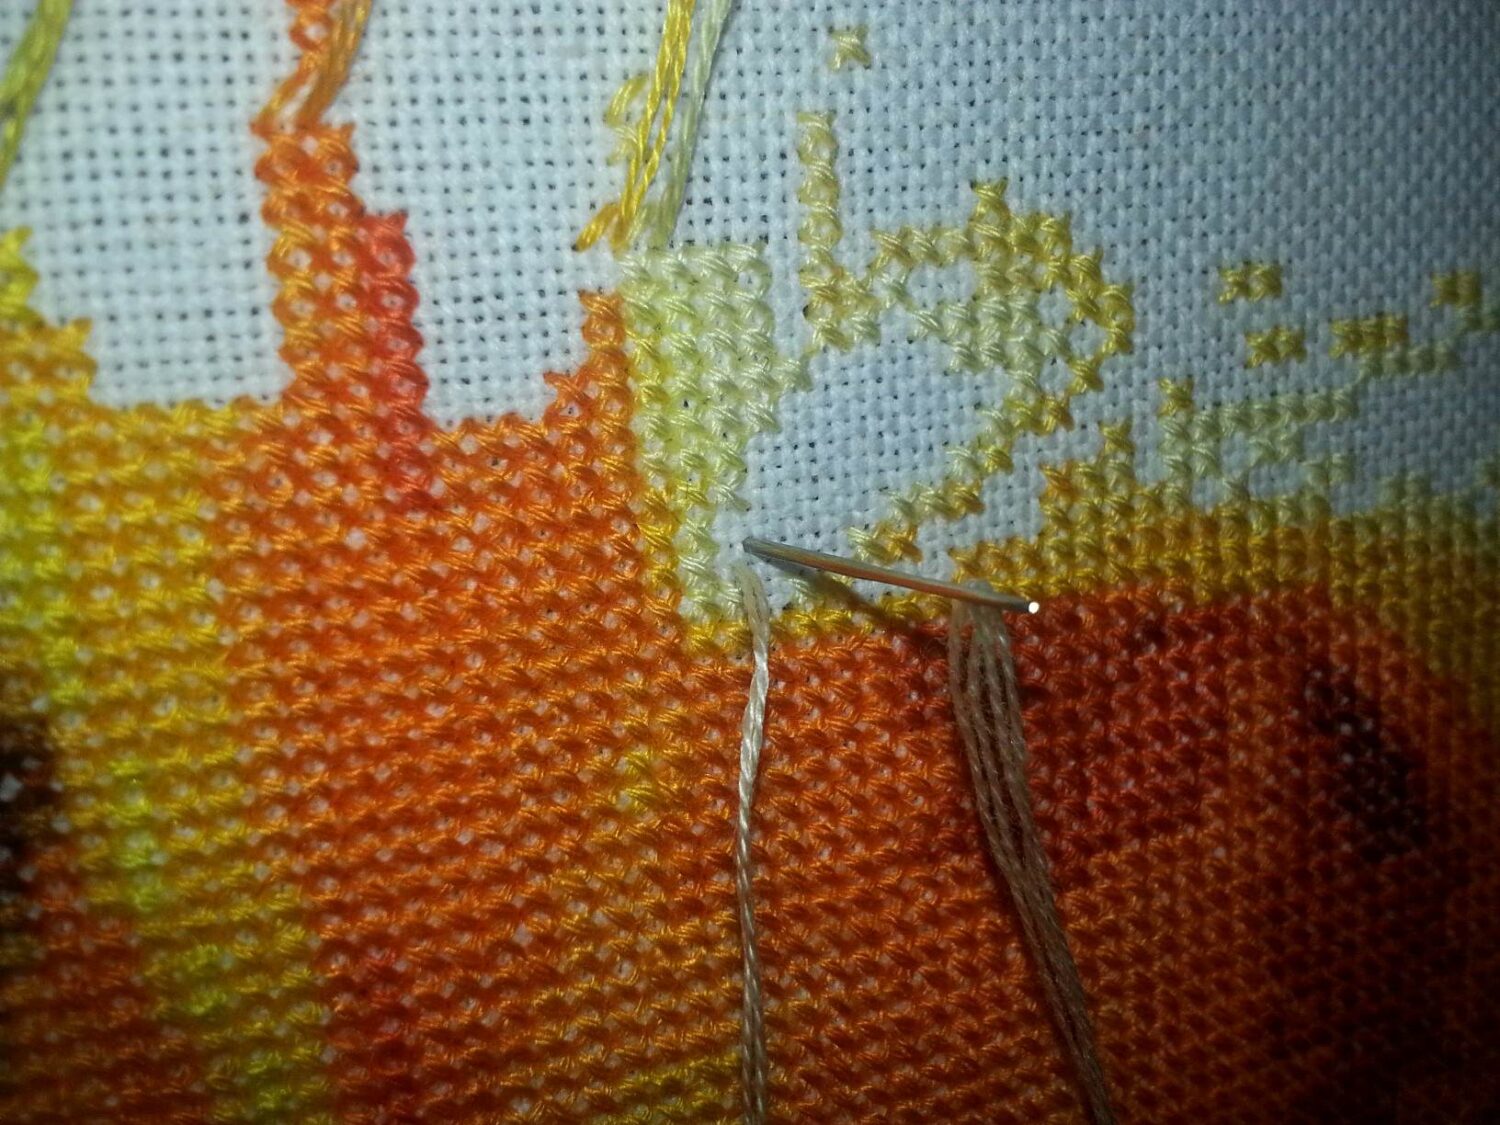 A close up of a pin stitching on a piece of canvas.